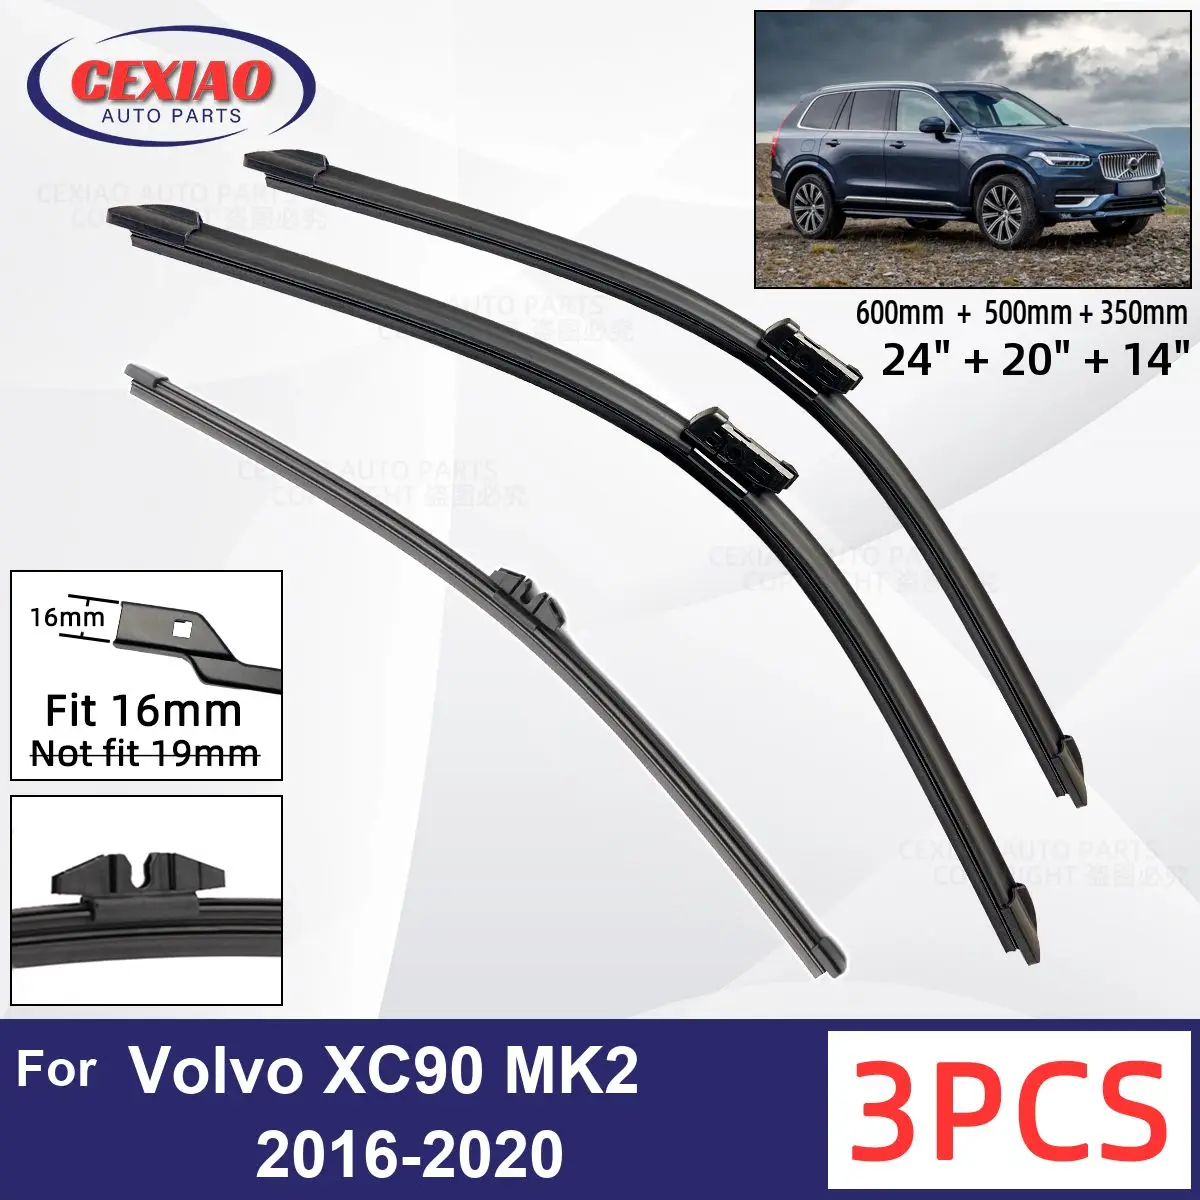 

For Volvo XC90 MK2 2016-2020 Car Front Rear Wiper Blades Soft Rubber Windscreen Wipers Auto Windshield 24"20"14" 2017 2018 2019